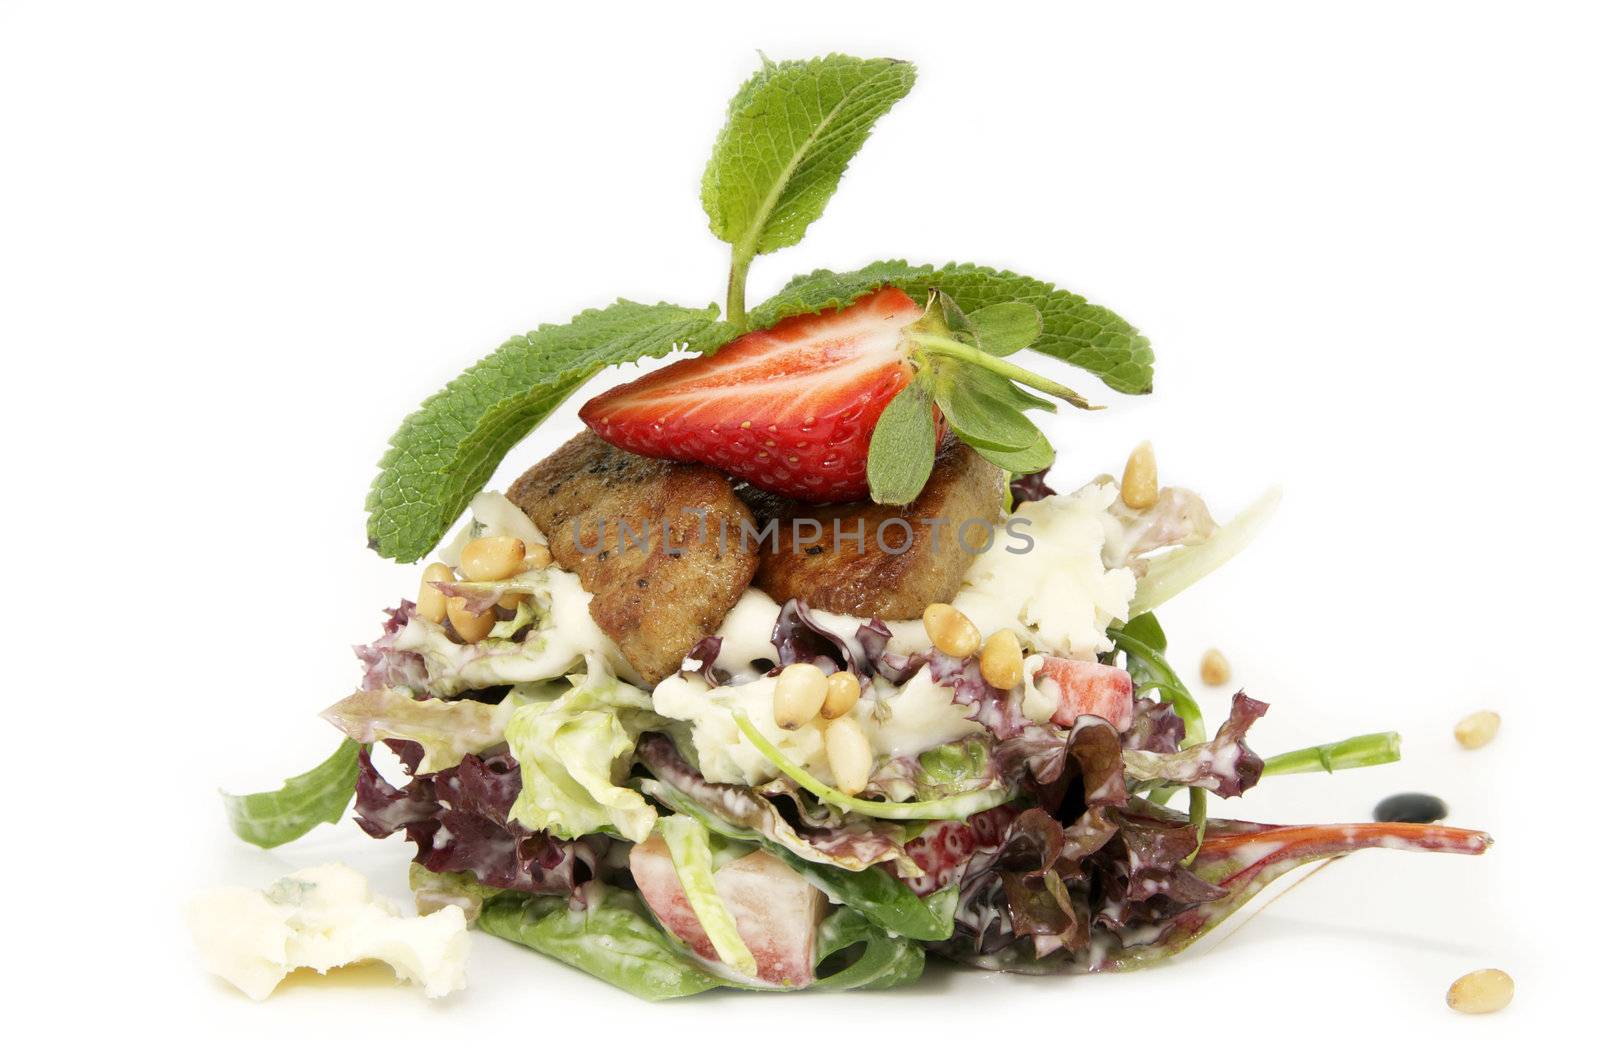 a salad of vegetables and meat on a white background